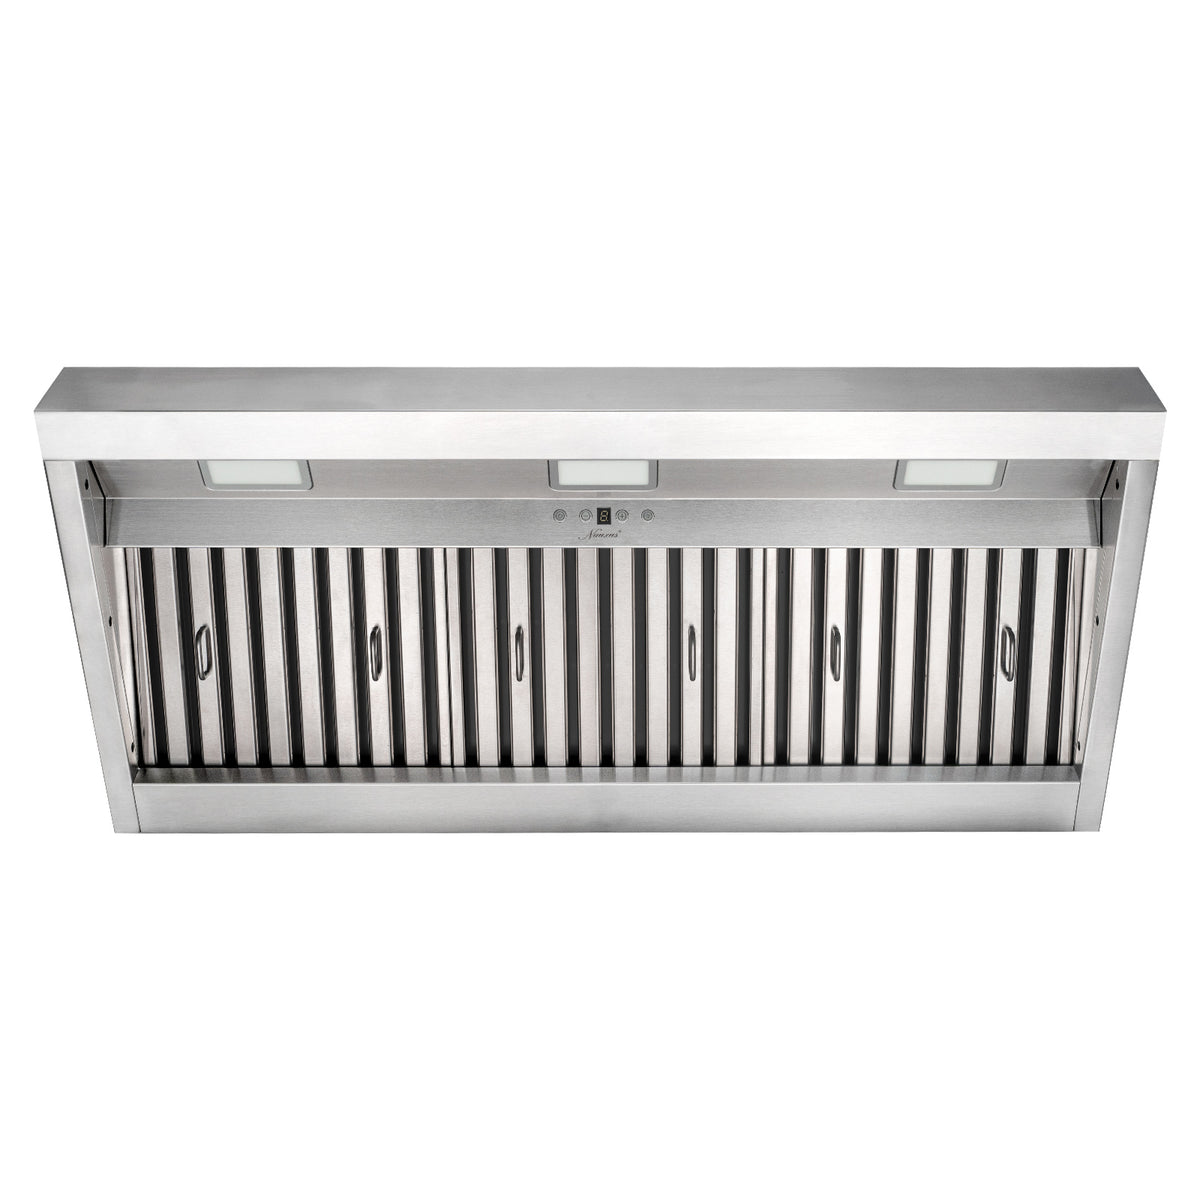 42 Inch Insert/Built-in Range Hood, Ultra Quiet, Powerful Suction Stainless Steel 8'' Duct Kitchen Vent Hood with Dimmable LED Light, 4-Speeds 1200CFM